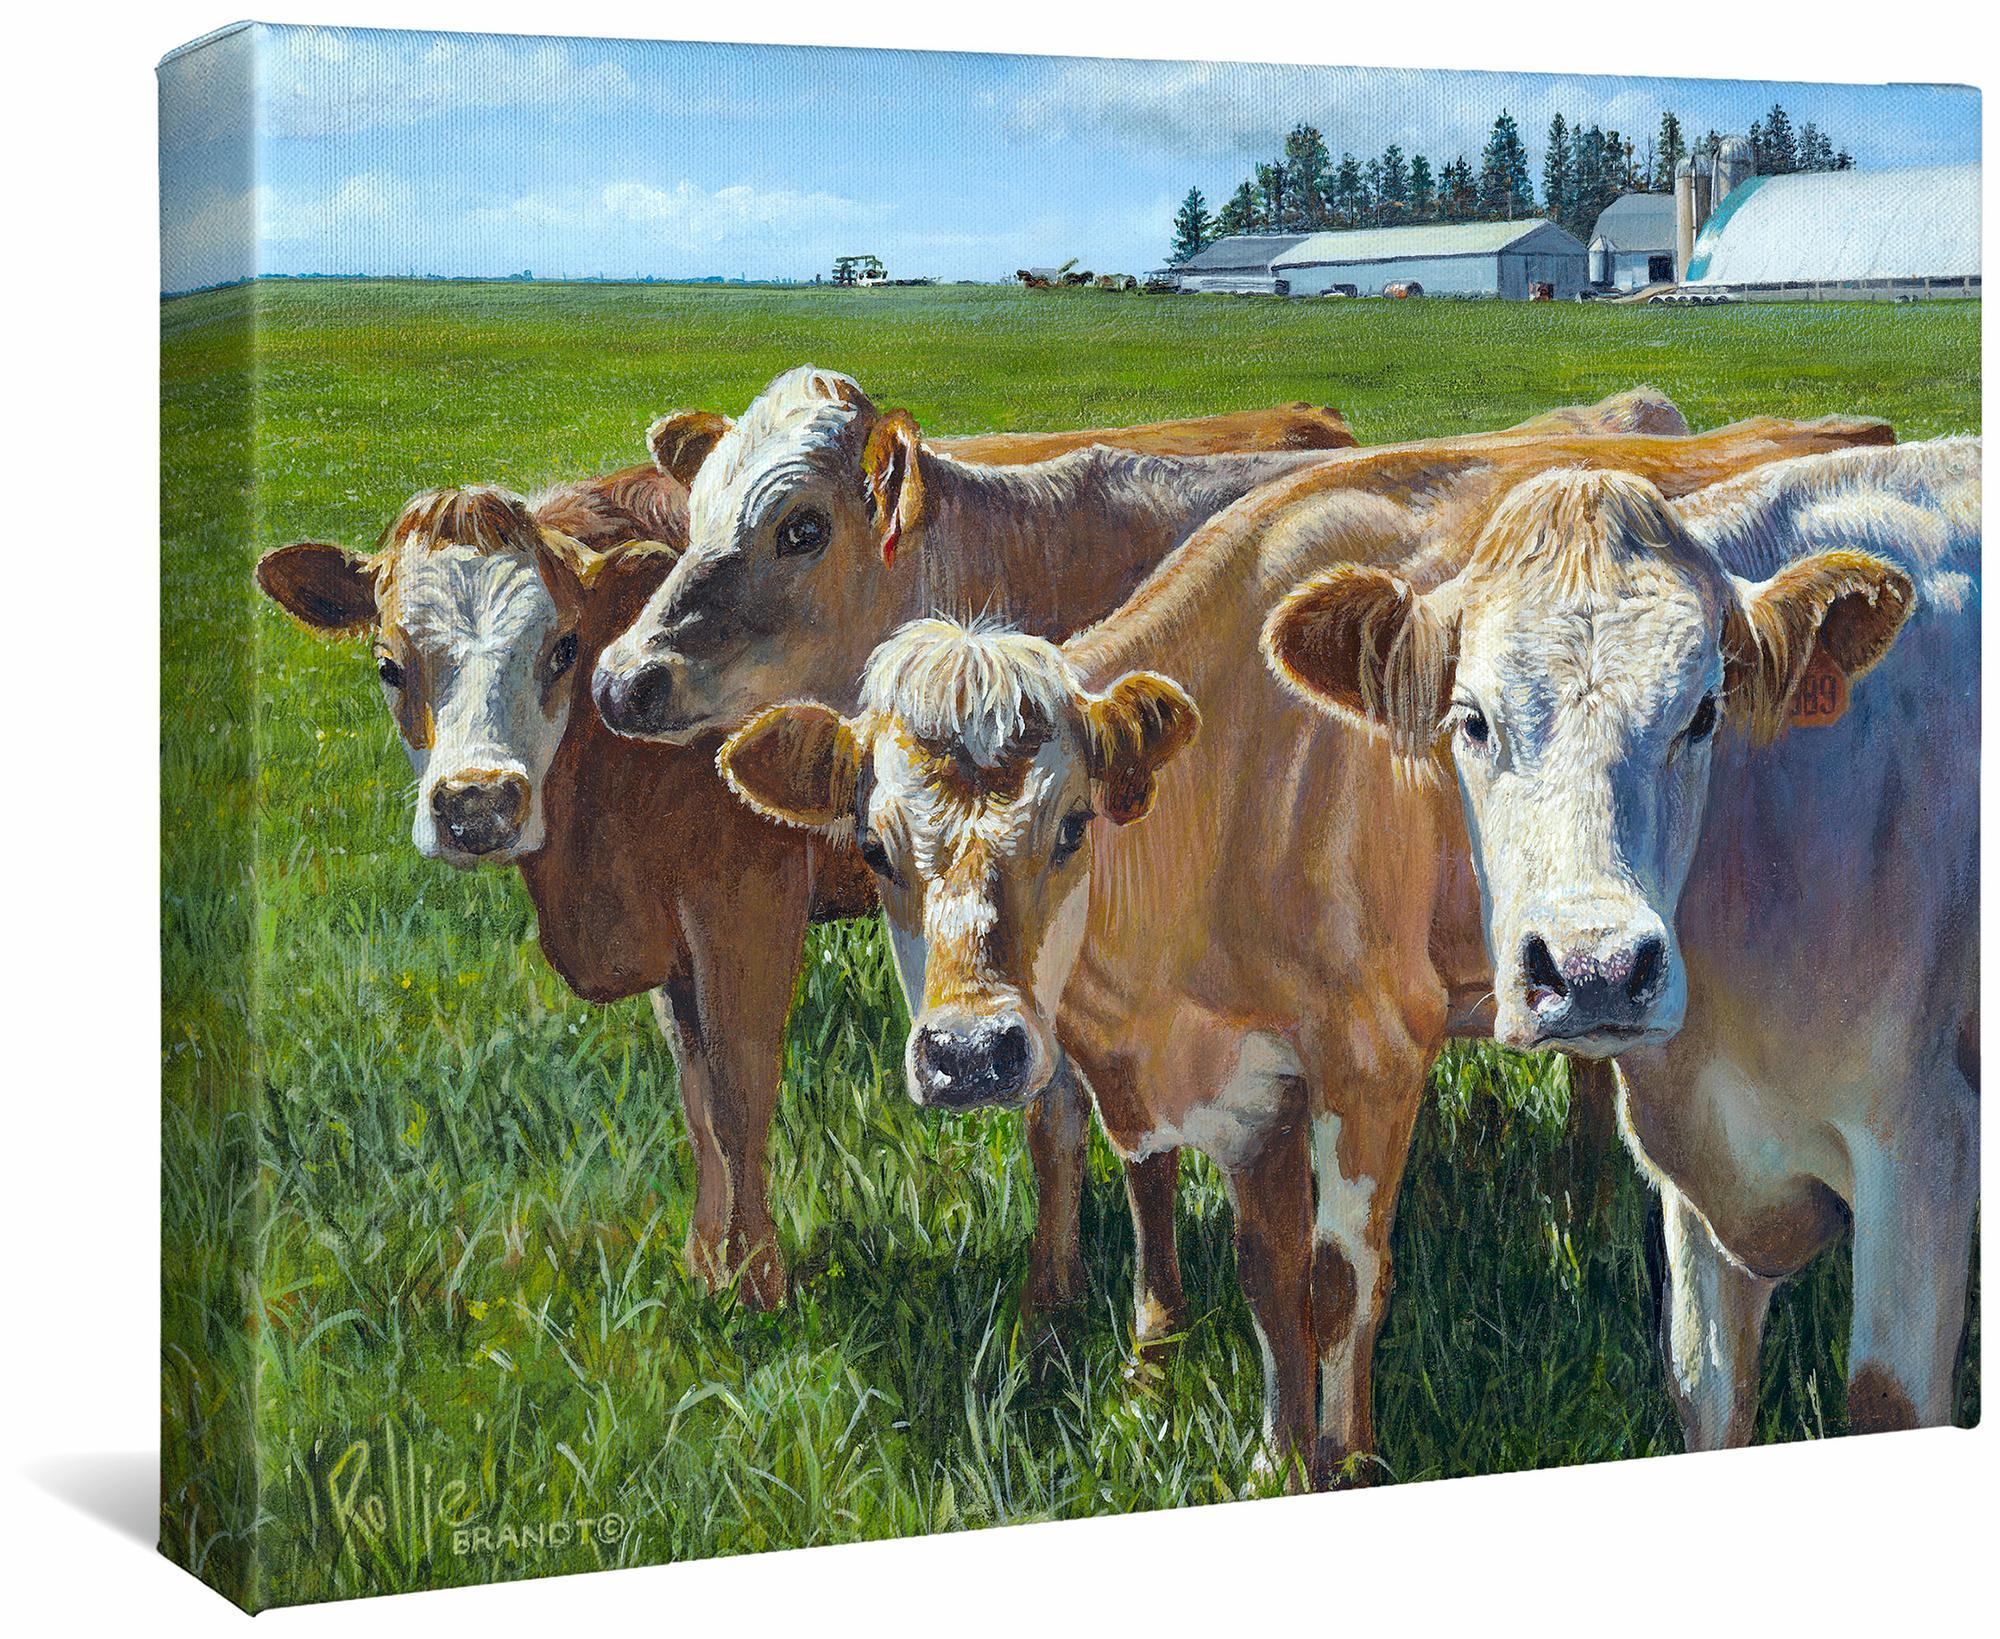 Udder Curiosity—Cows Gallery Wrapped Canvas - Wild Wings